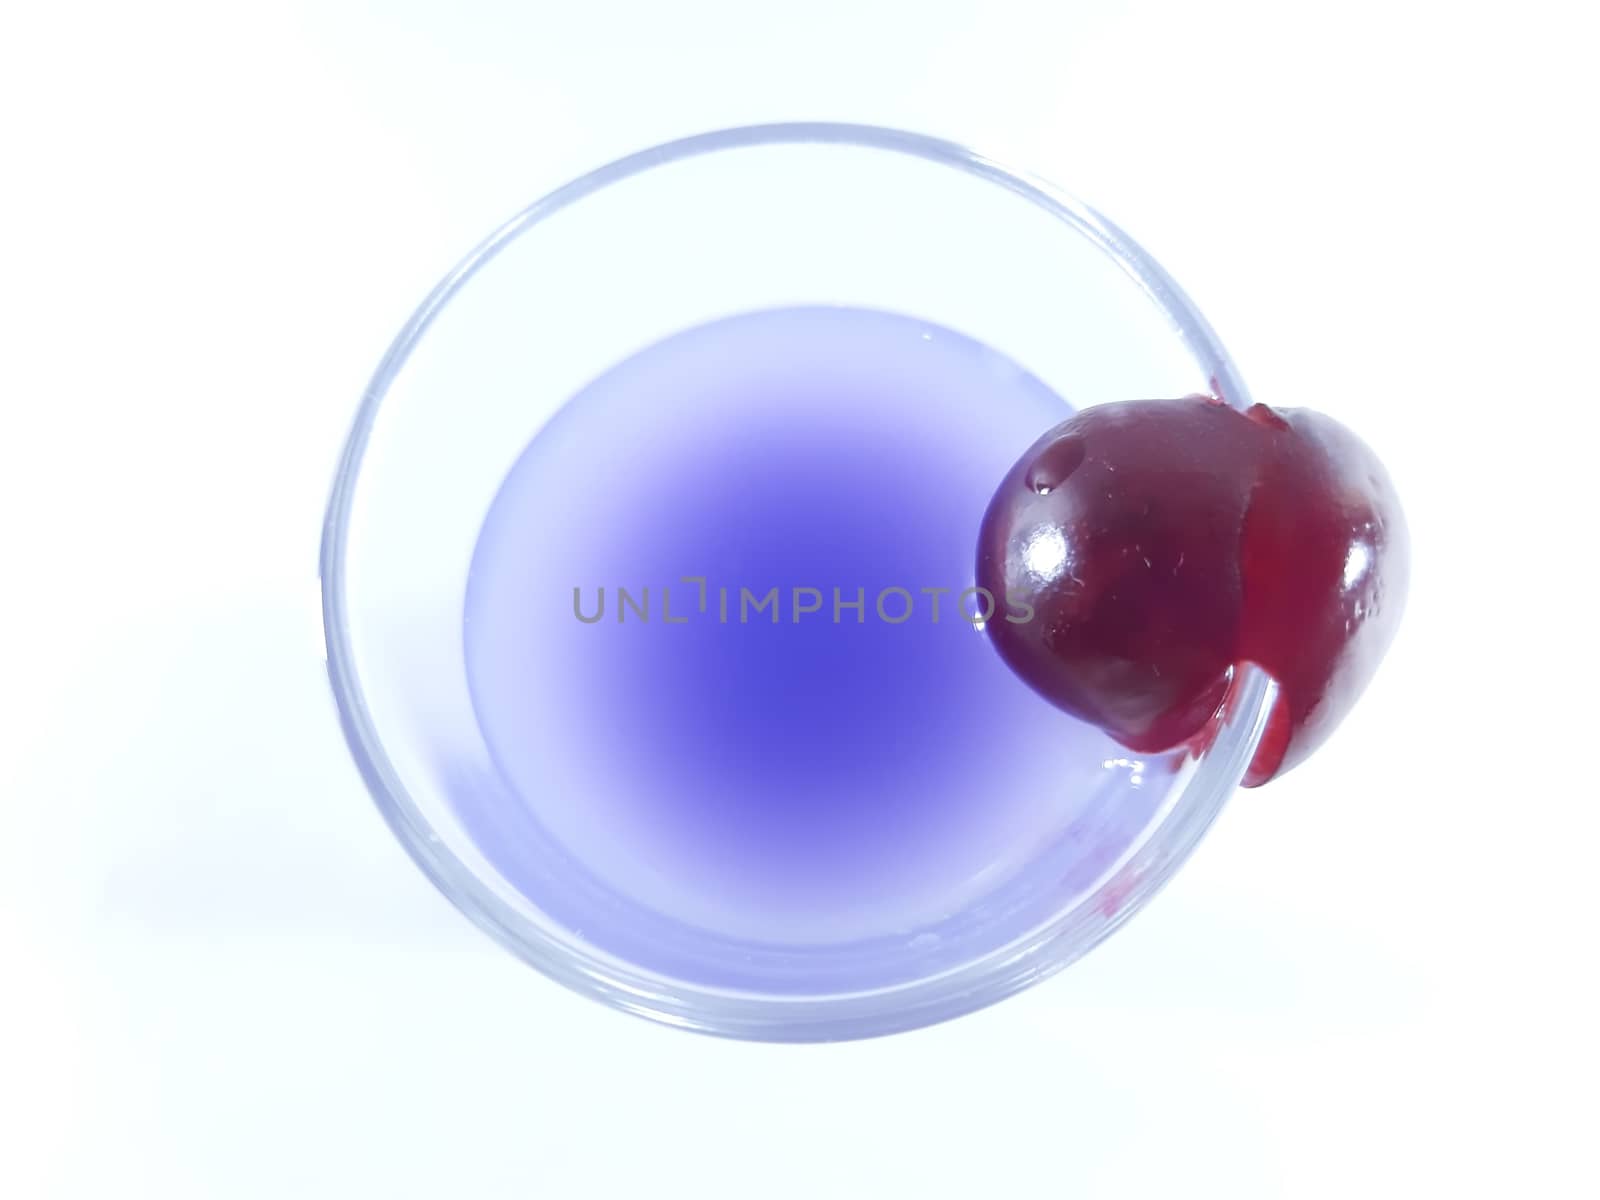 Drink with fruit in transparent glass. Cherry for a snack. Violet liquid in a glass. Photo